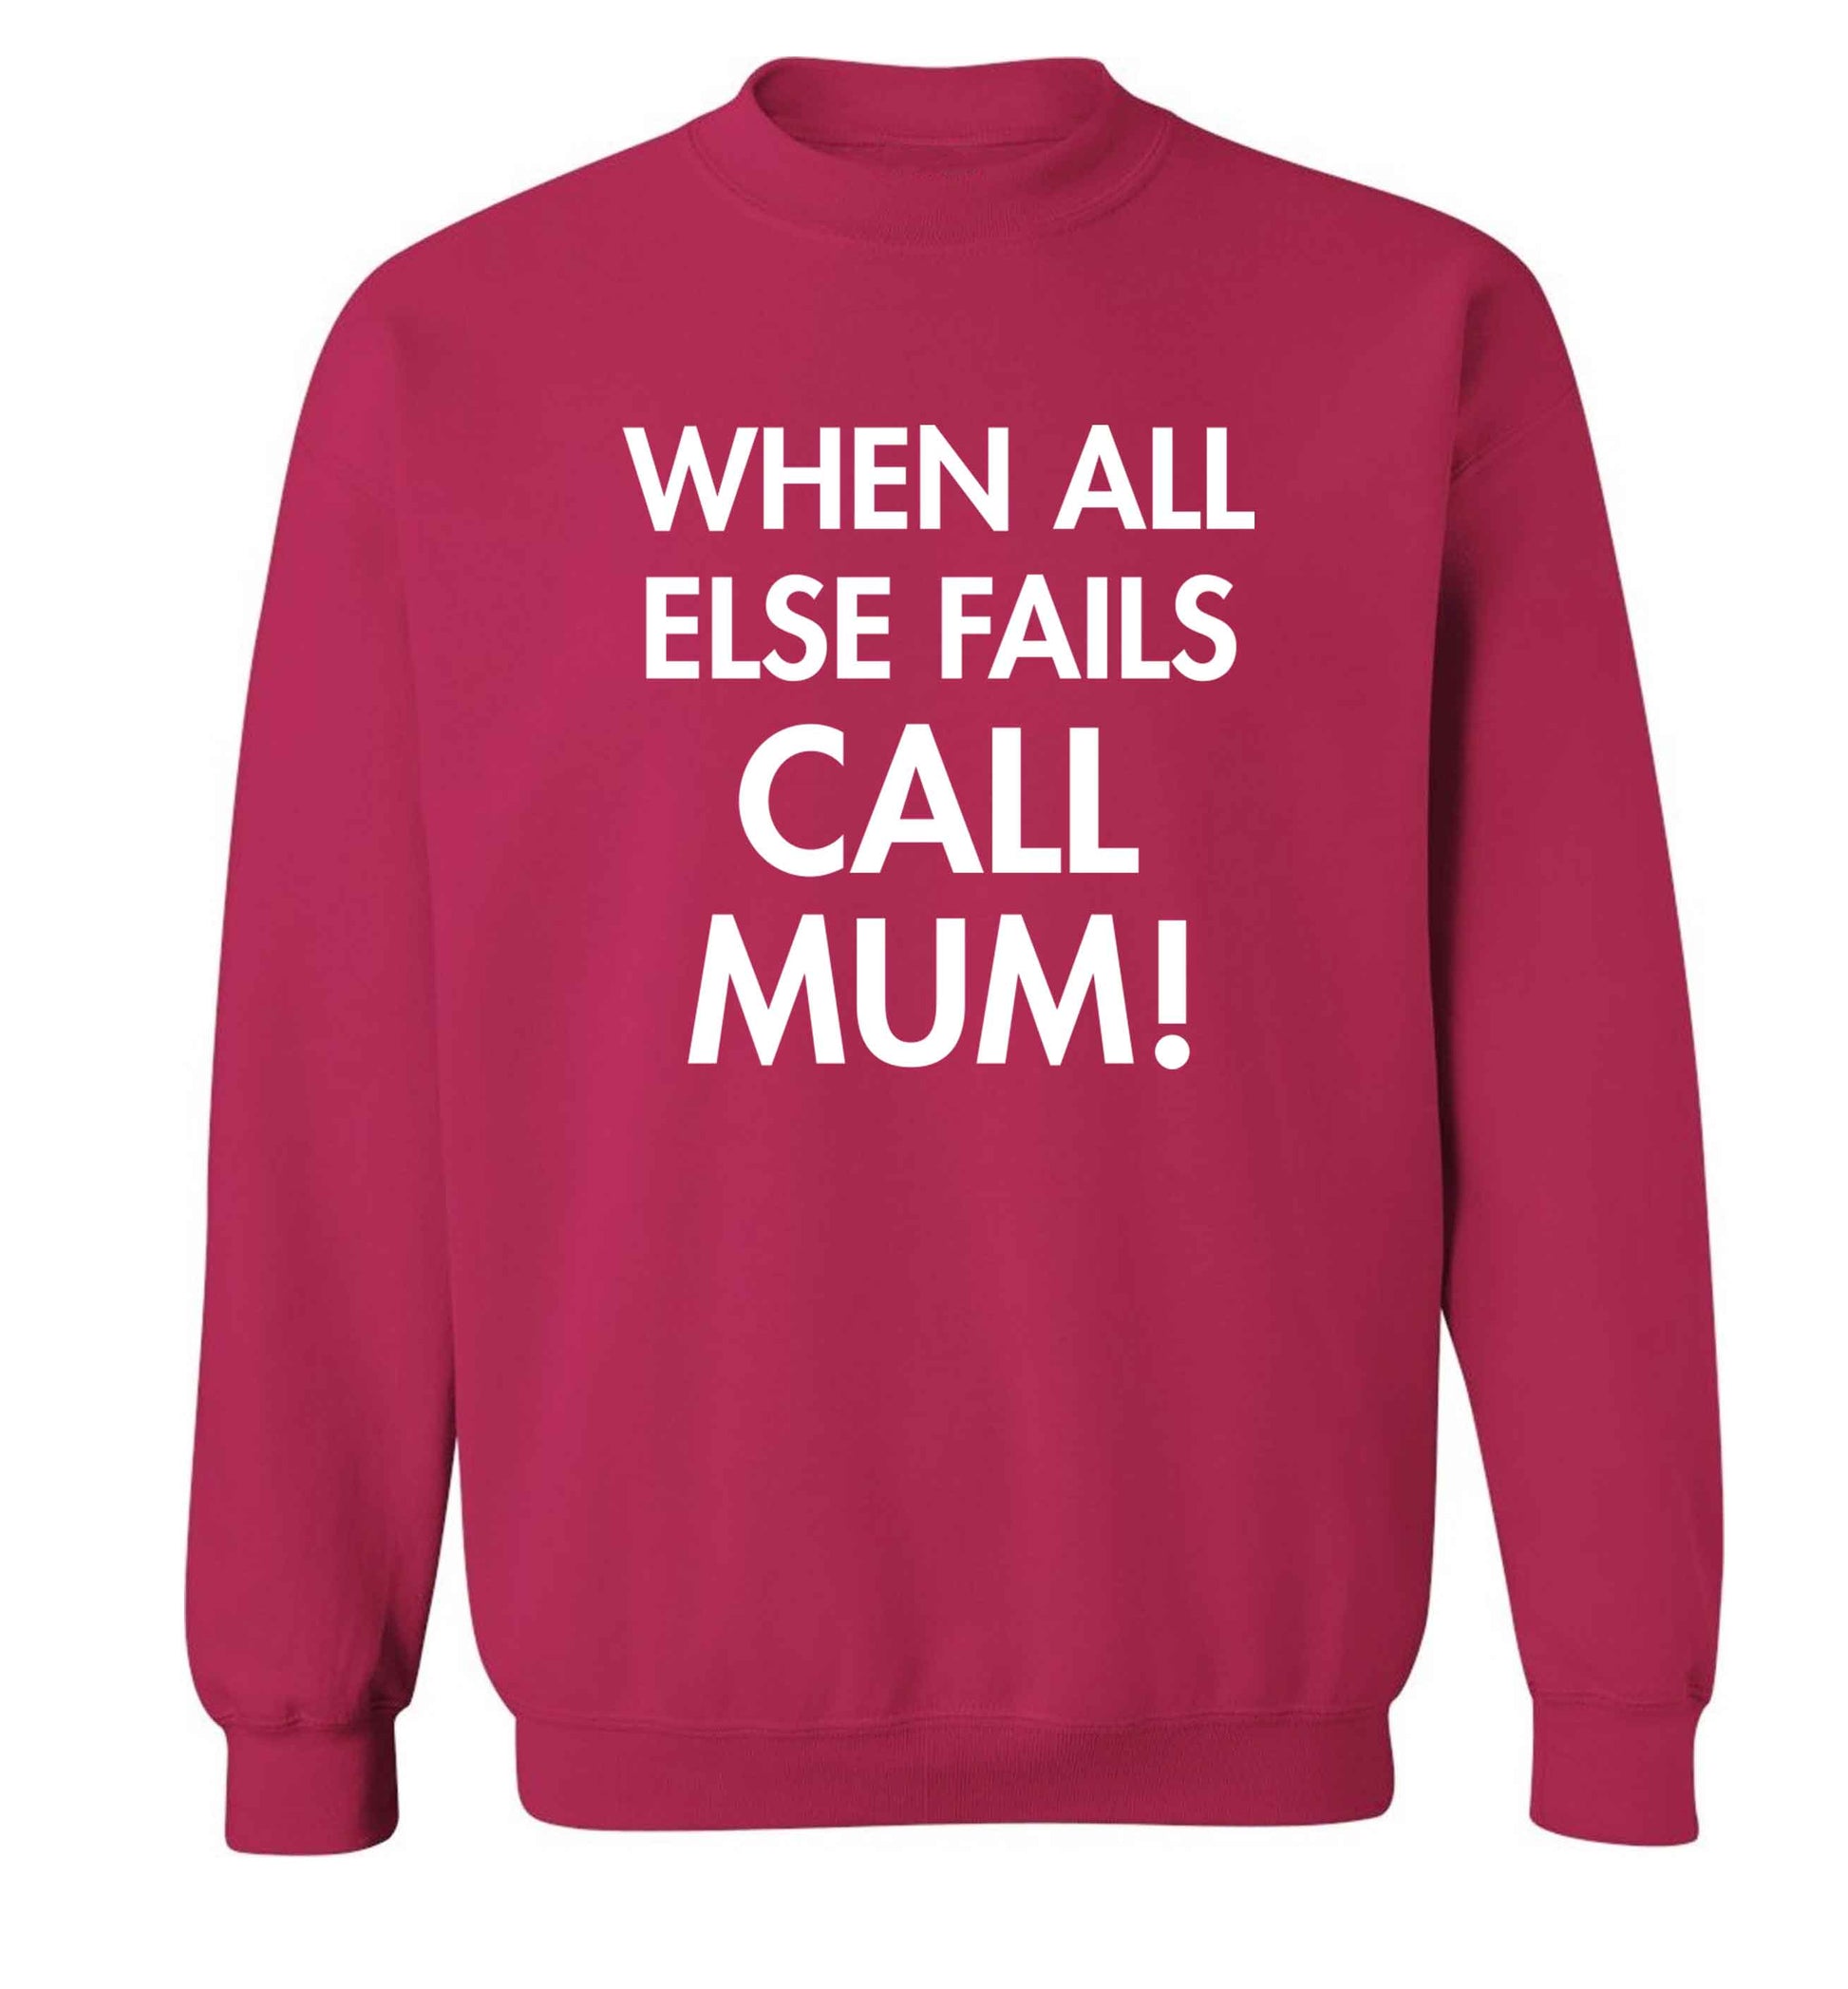 When all else fails call mum! adult's unisex pink sweater 2XL